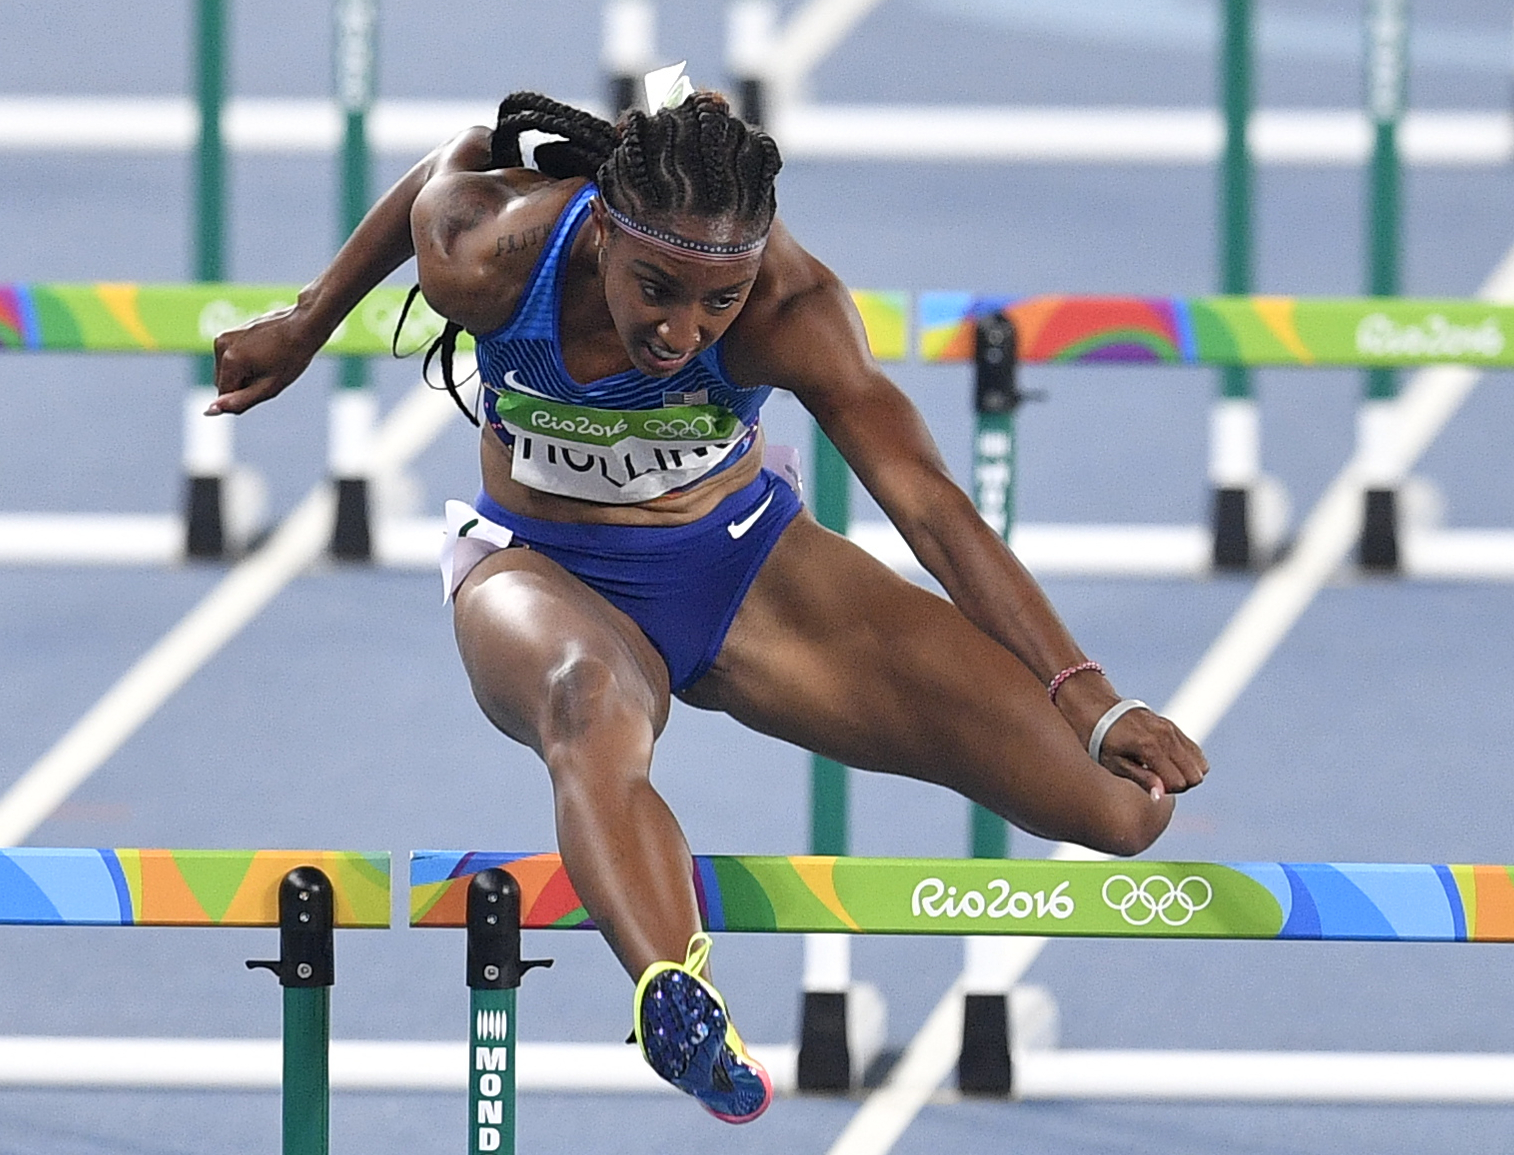 United States' Brianna Rollins competes in the women's 100-meter hurdles final during the athletics competitions of the 2016 Summer Olympics at the Olympic stadium in Rio de Janeiro, Brazil, Wednesday, Aug. 17, 2016. (AP Photo/Martin Meissner)